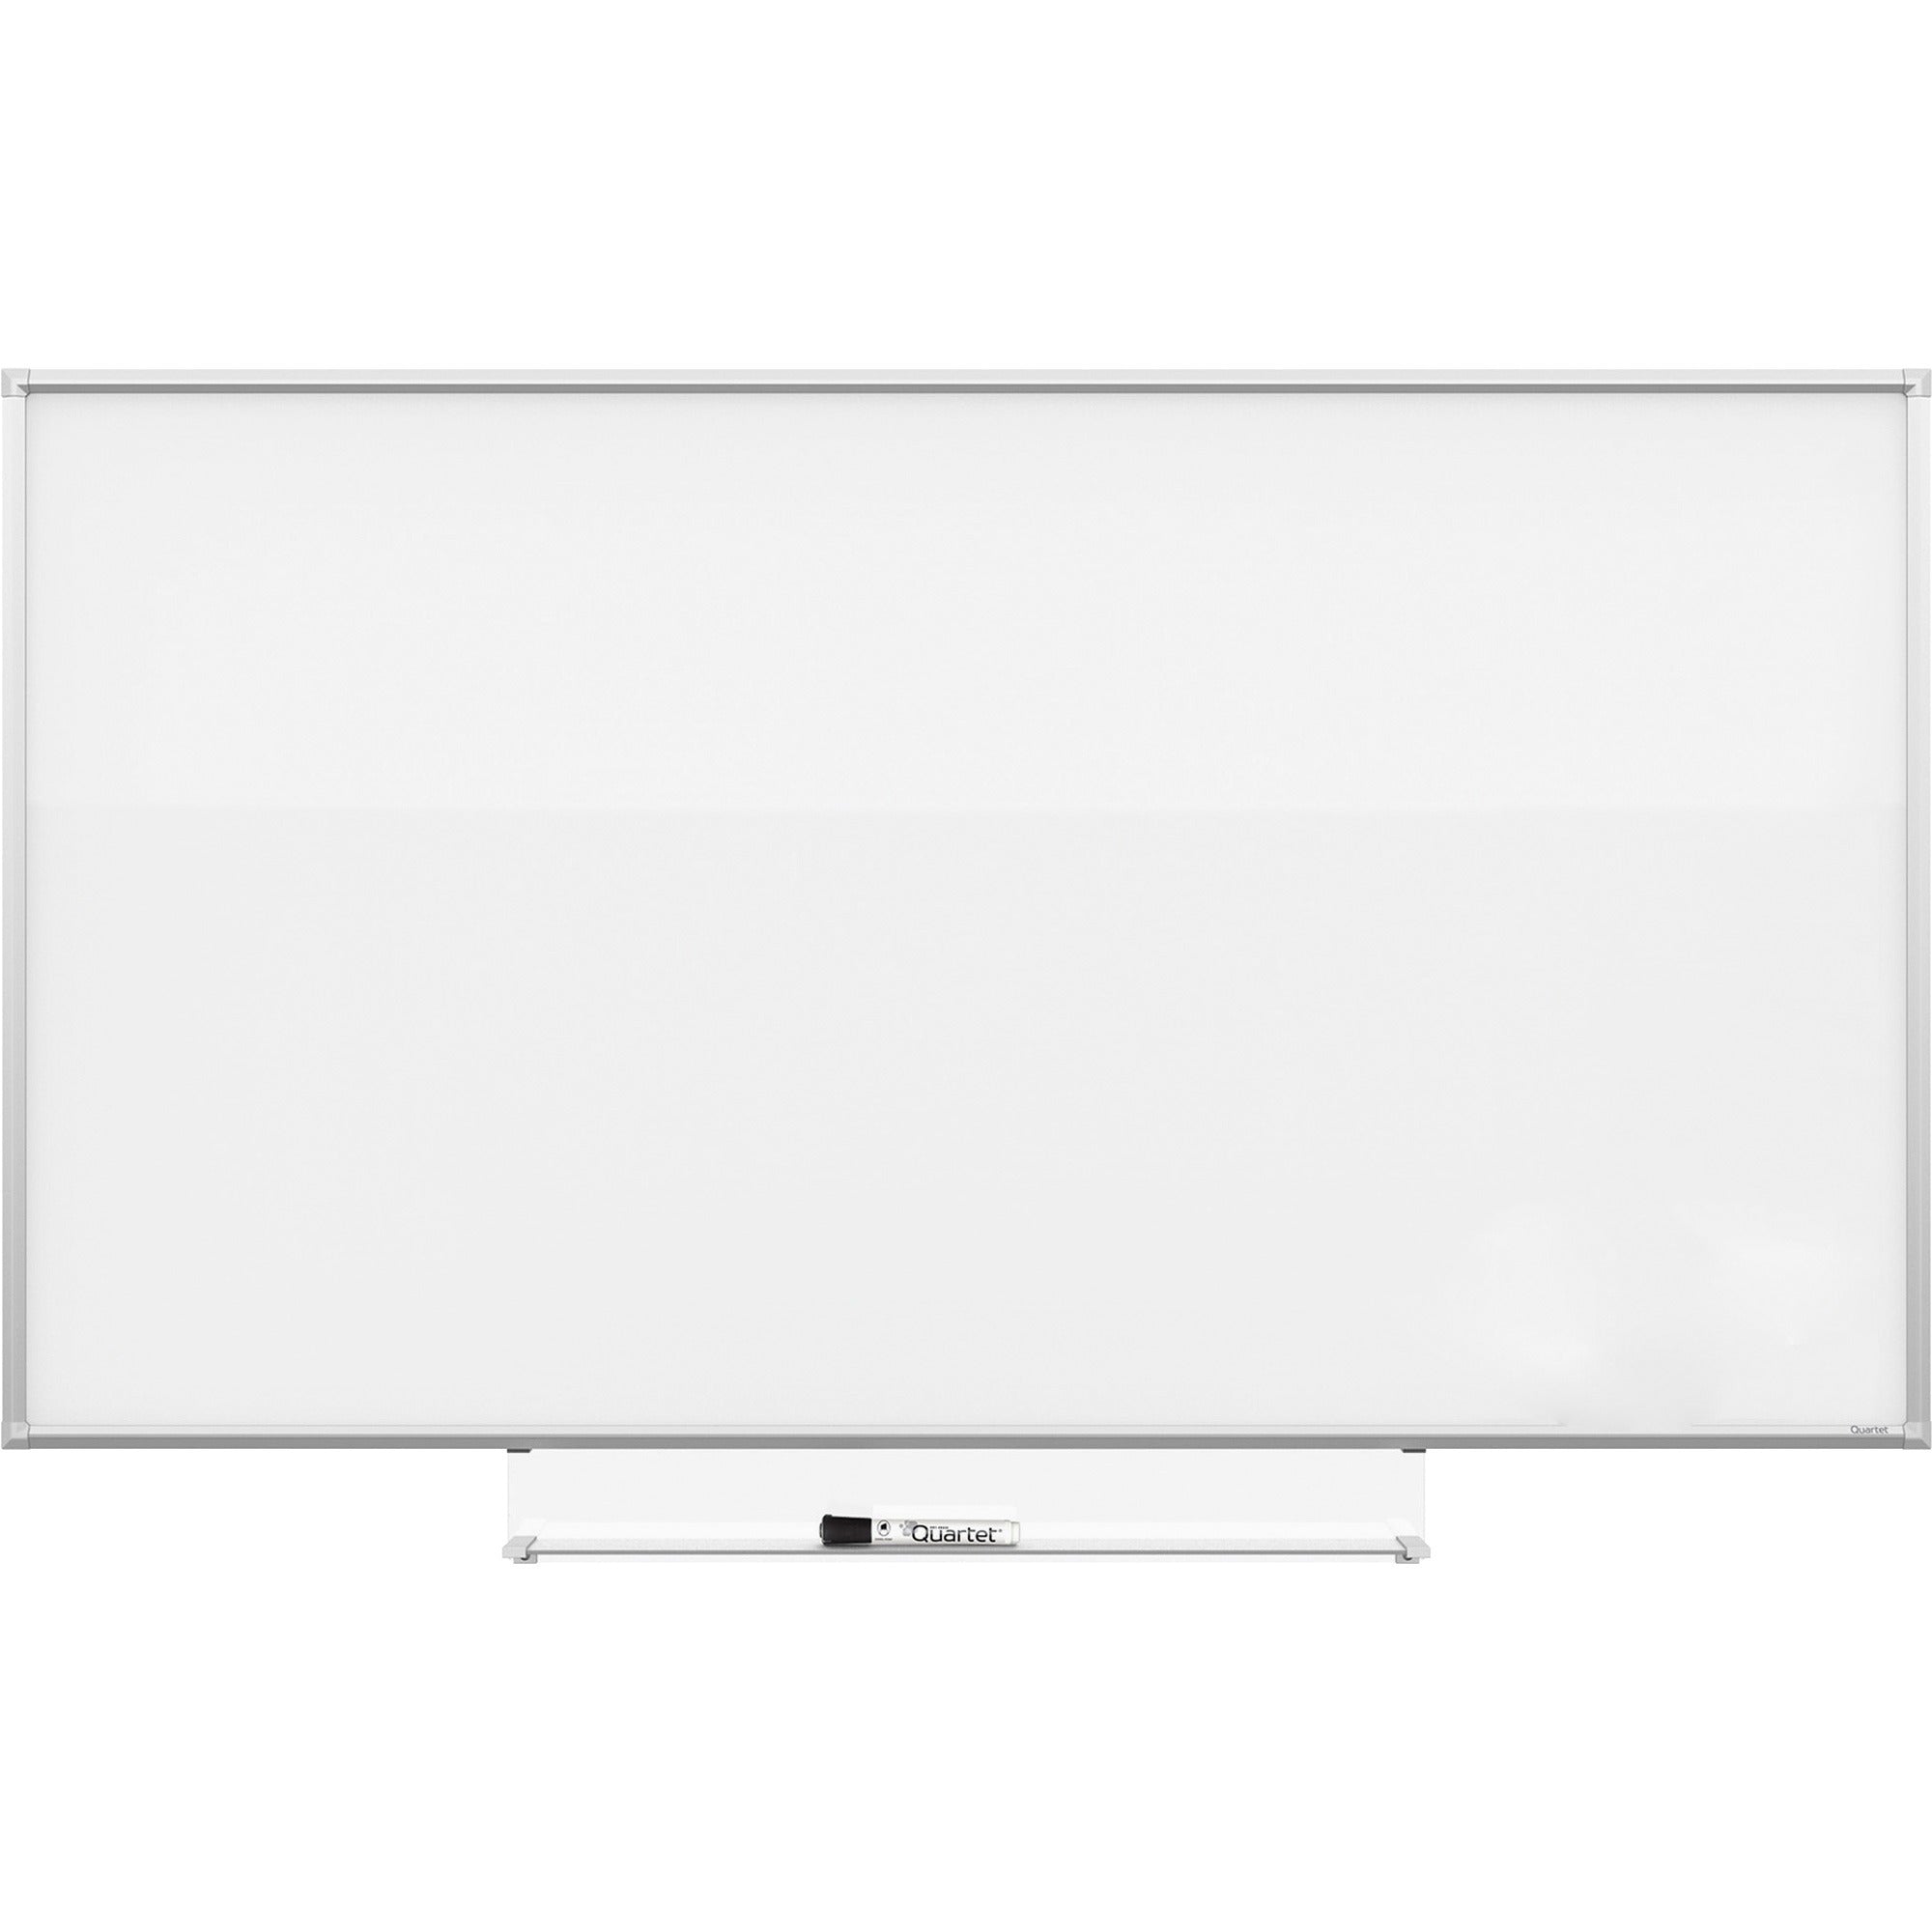 quartet-silhouette-total-erase-board-48-4-ft-width-x-85-71-ft-height-white-melamine-surface-rectangle-assembly-required-1-each_qrtc8548 - 1